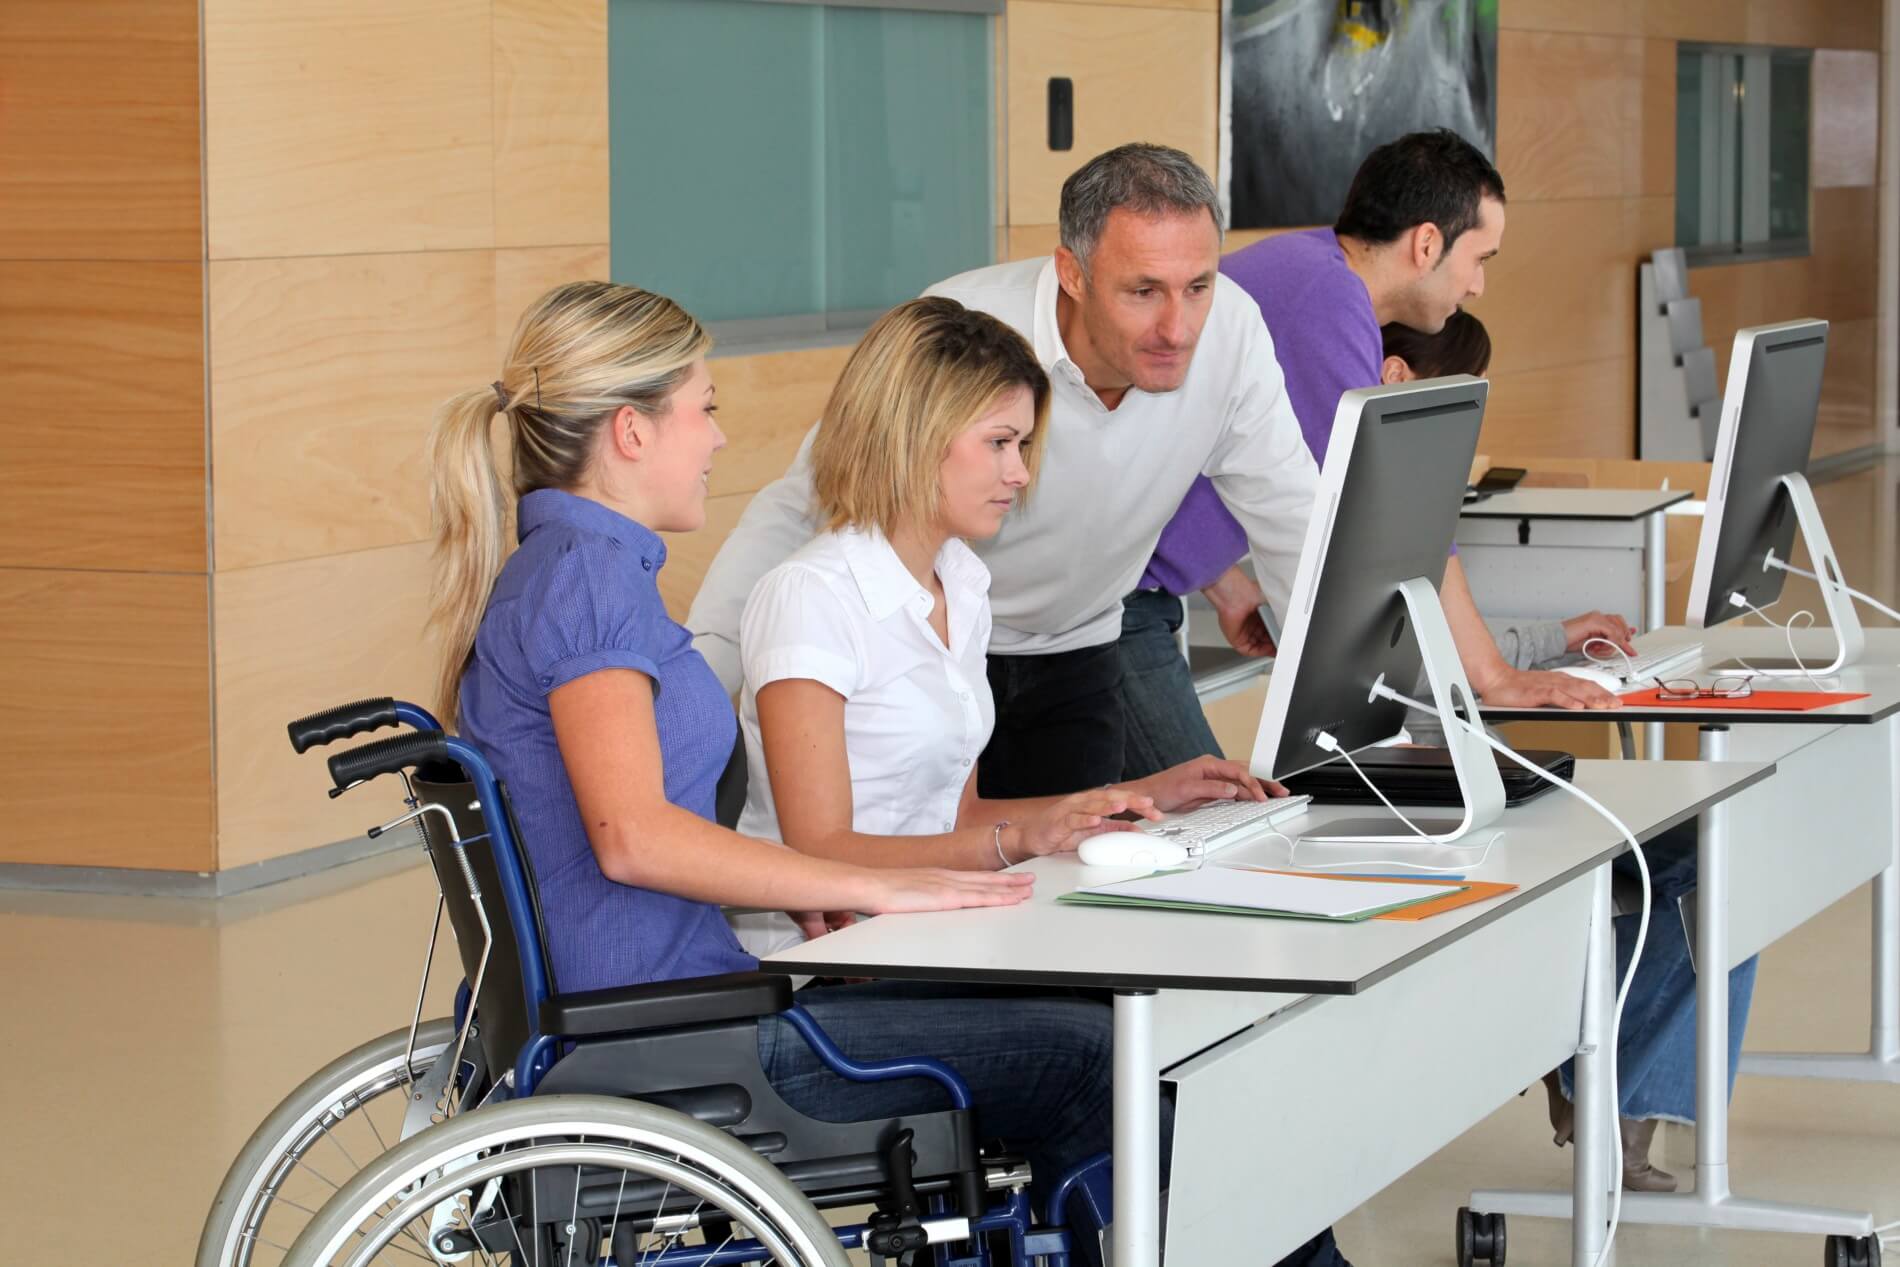 A women in a wheelchair at a desk with two other people looking at a desktop computer